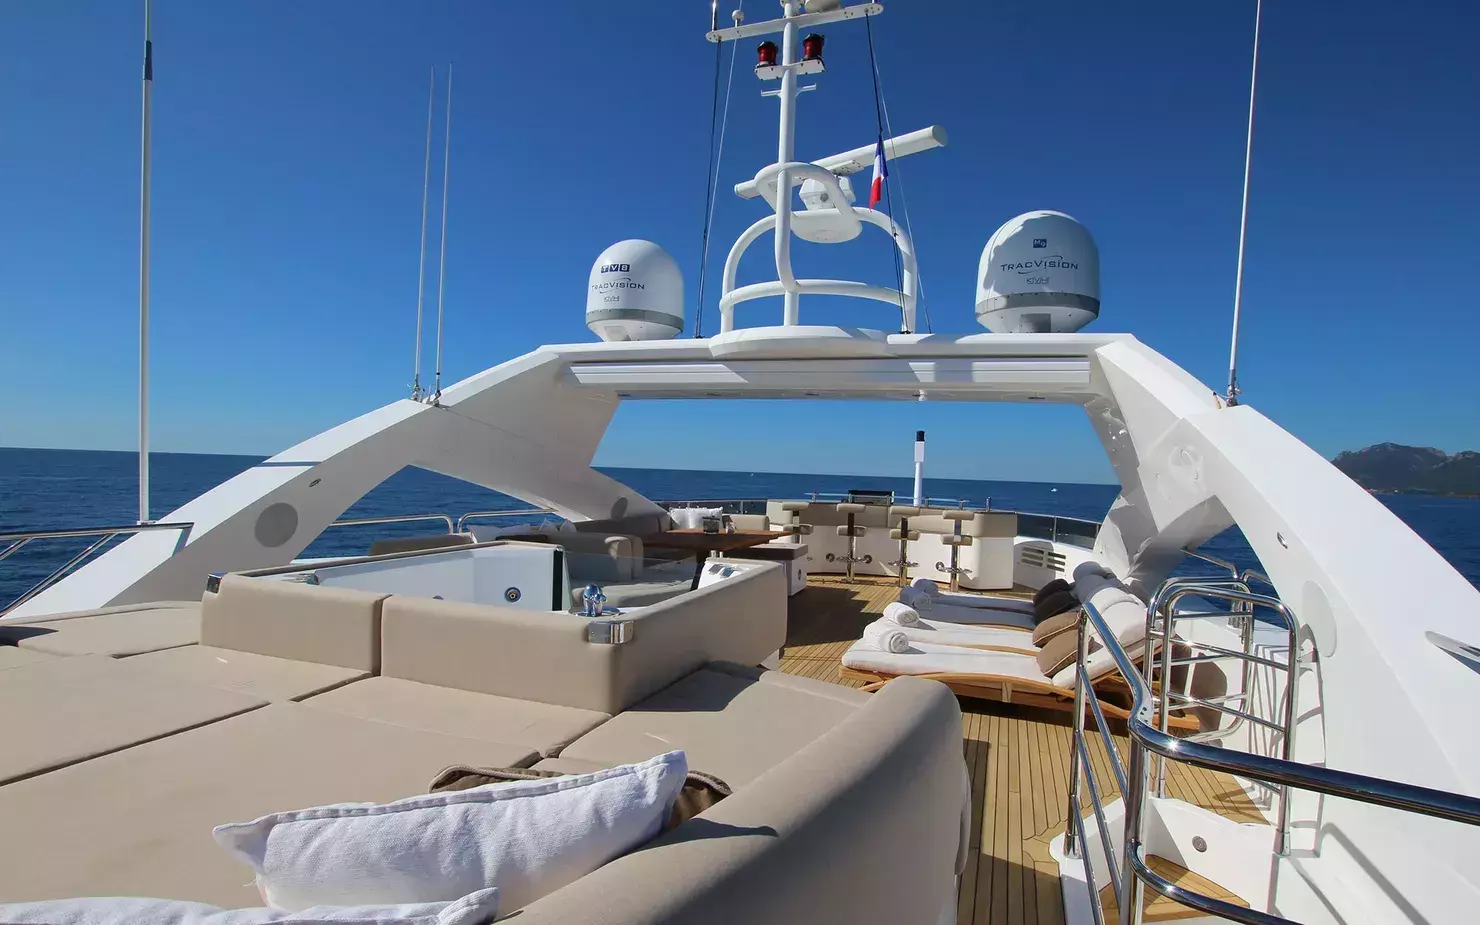 Lusia M by Sunseeker - Top rates for a Charter of a private Superyacht in Monaco